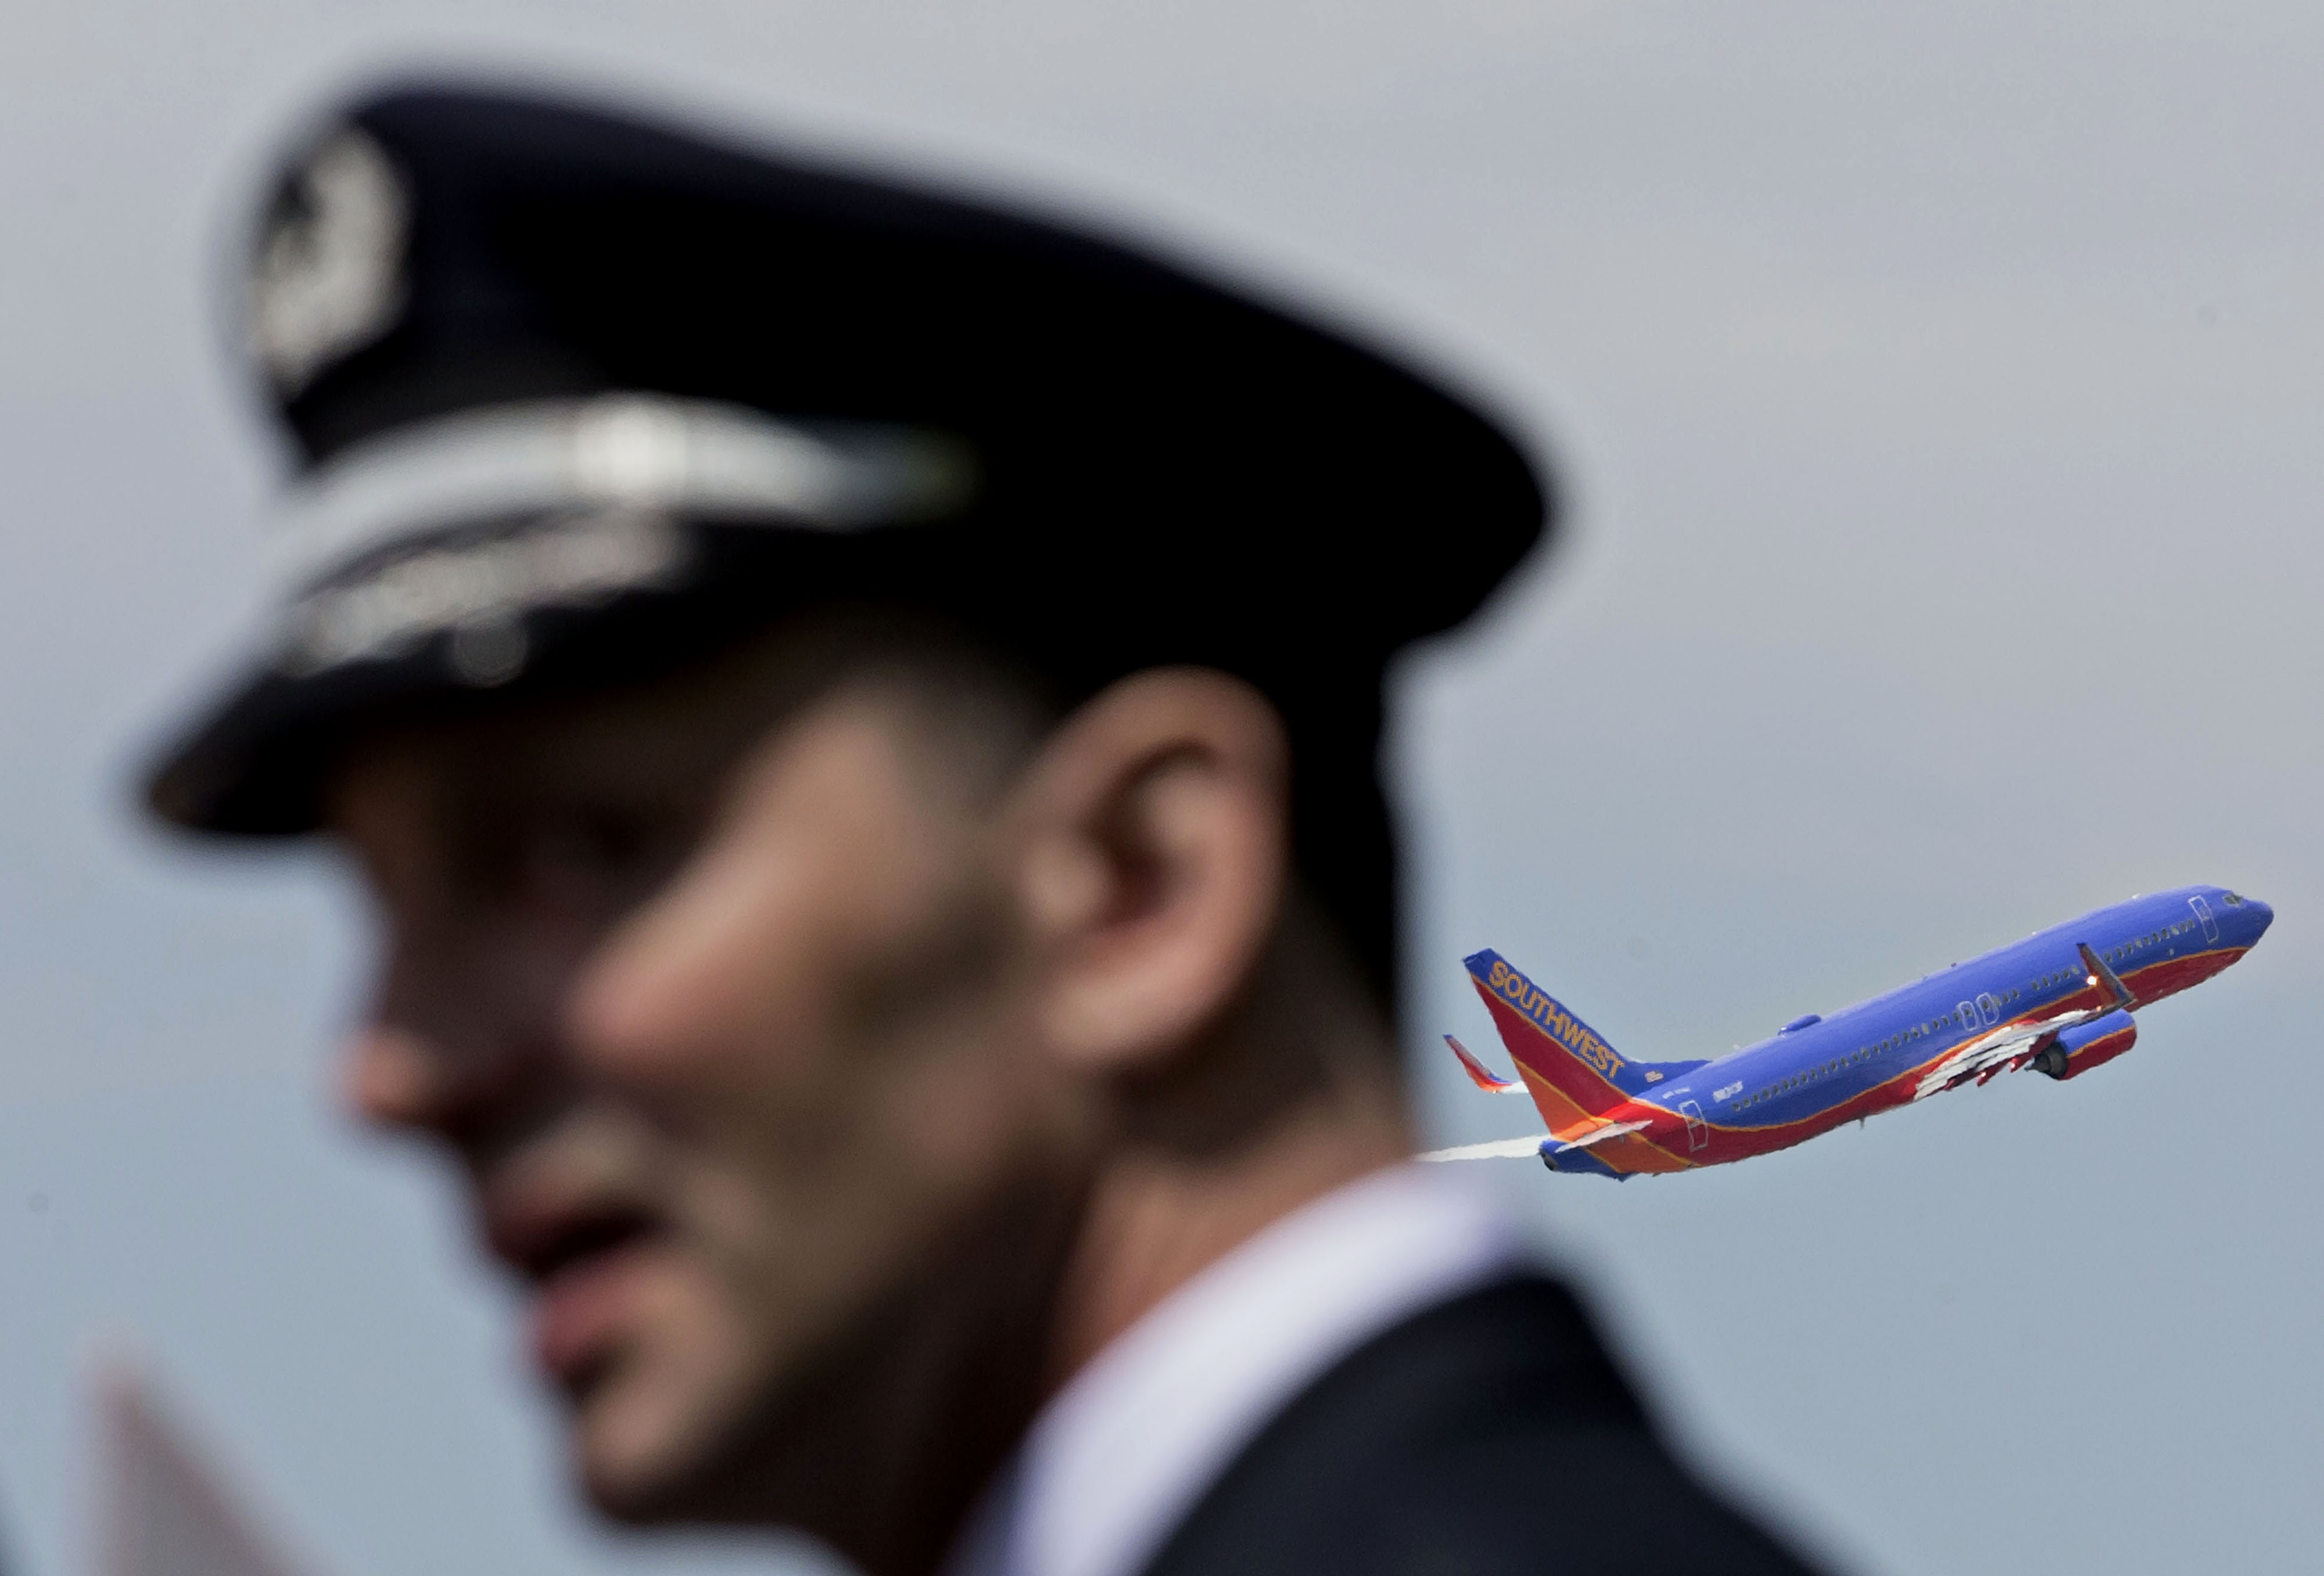 A Southwest Airlines Co. plane takes off a pilot from the Southwest Airlines Pilots' Association (SWAPA) demonstrates outside Chicago Midway International Airport (MDW) in Chicago, Illinois, U.S., on Wednesday, May 18, 2016. (Bloomberg&mdash;Bloomberg via Getty Images)